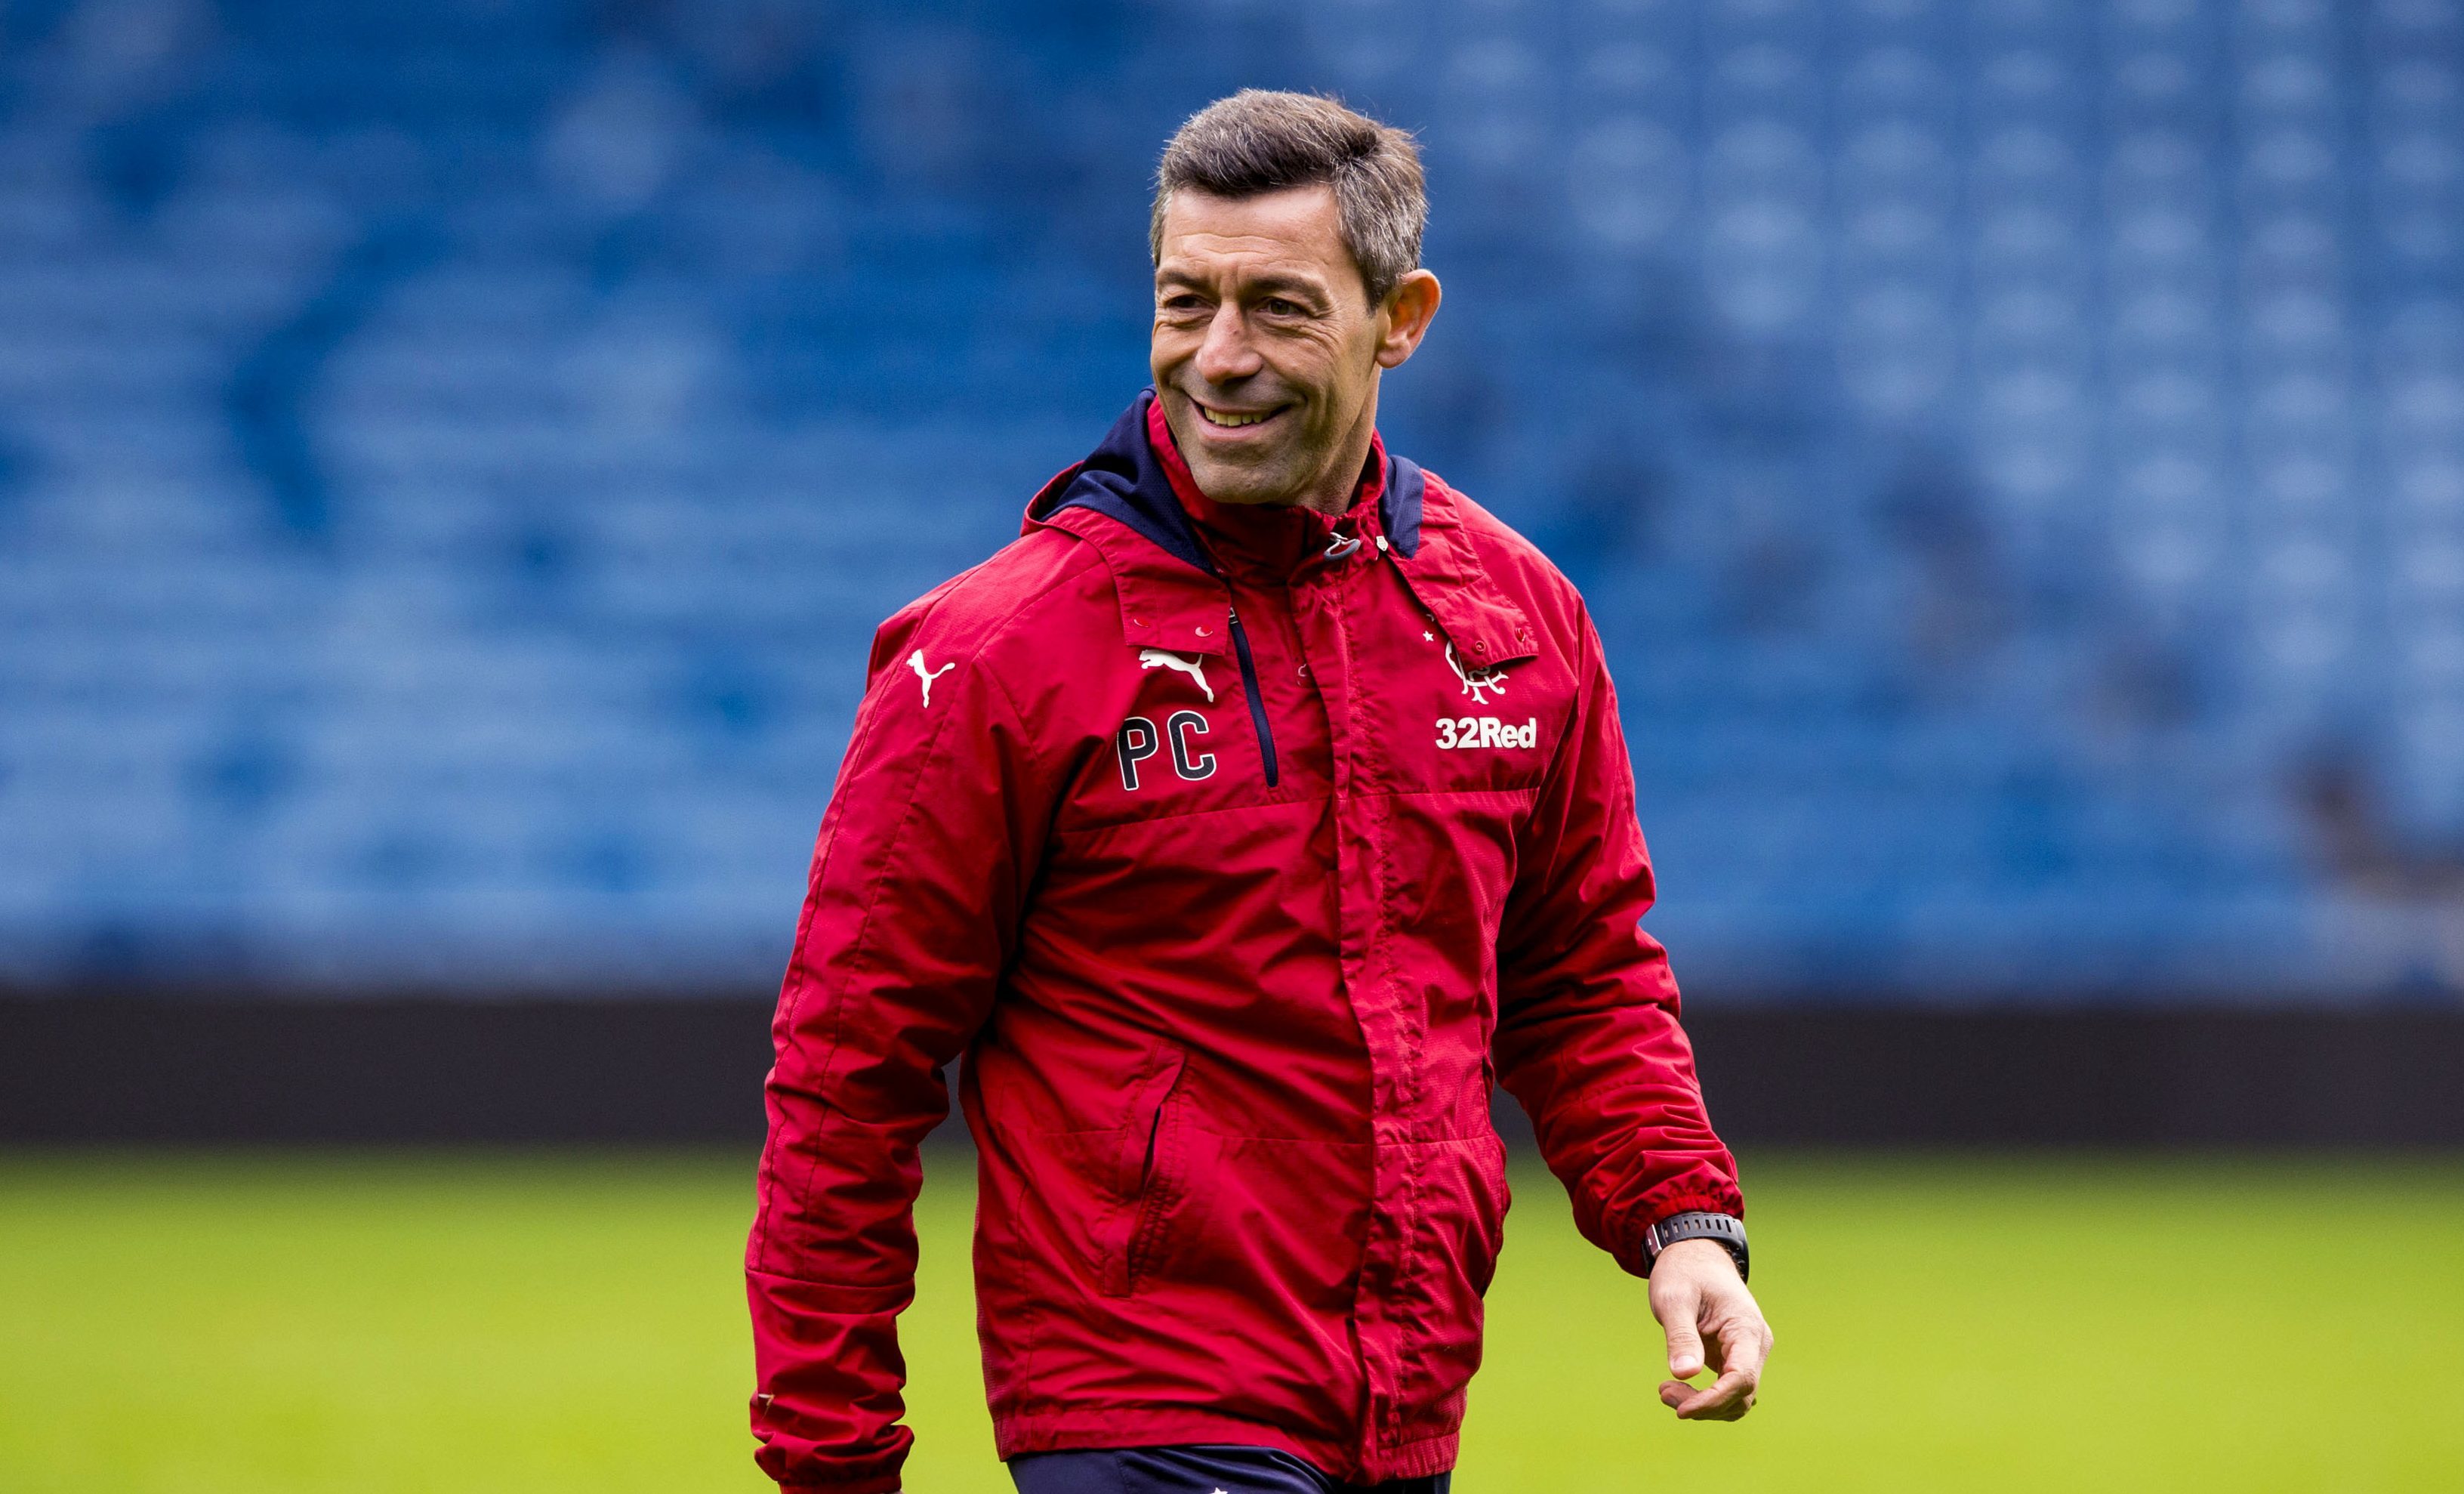 Rangers manager Pedro Caixinha takes training at Ibrox (SNS Group / Paul Devlin)